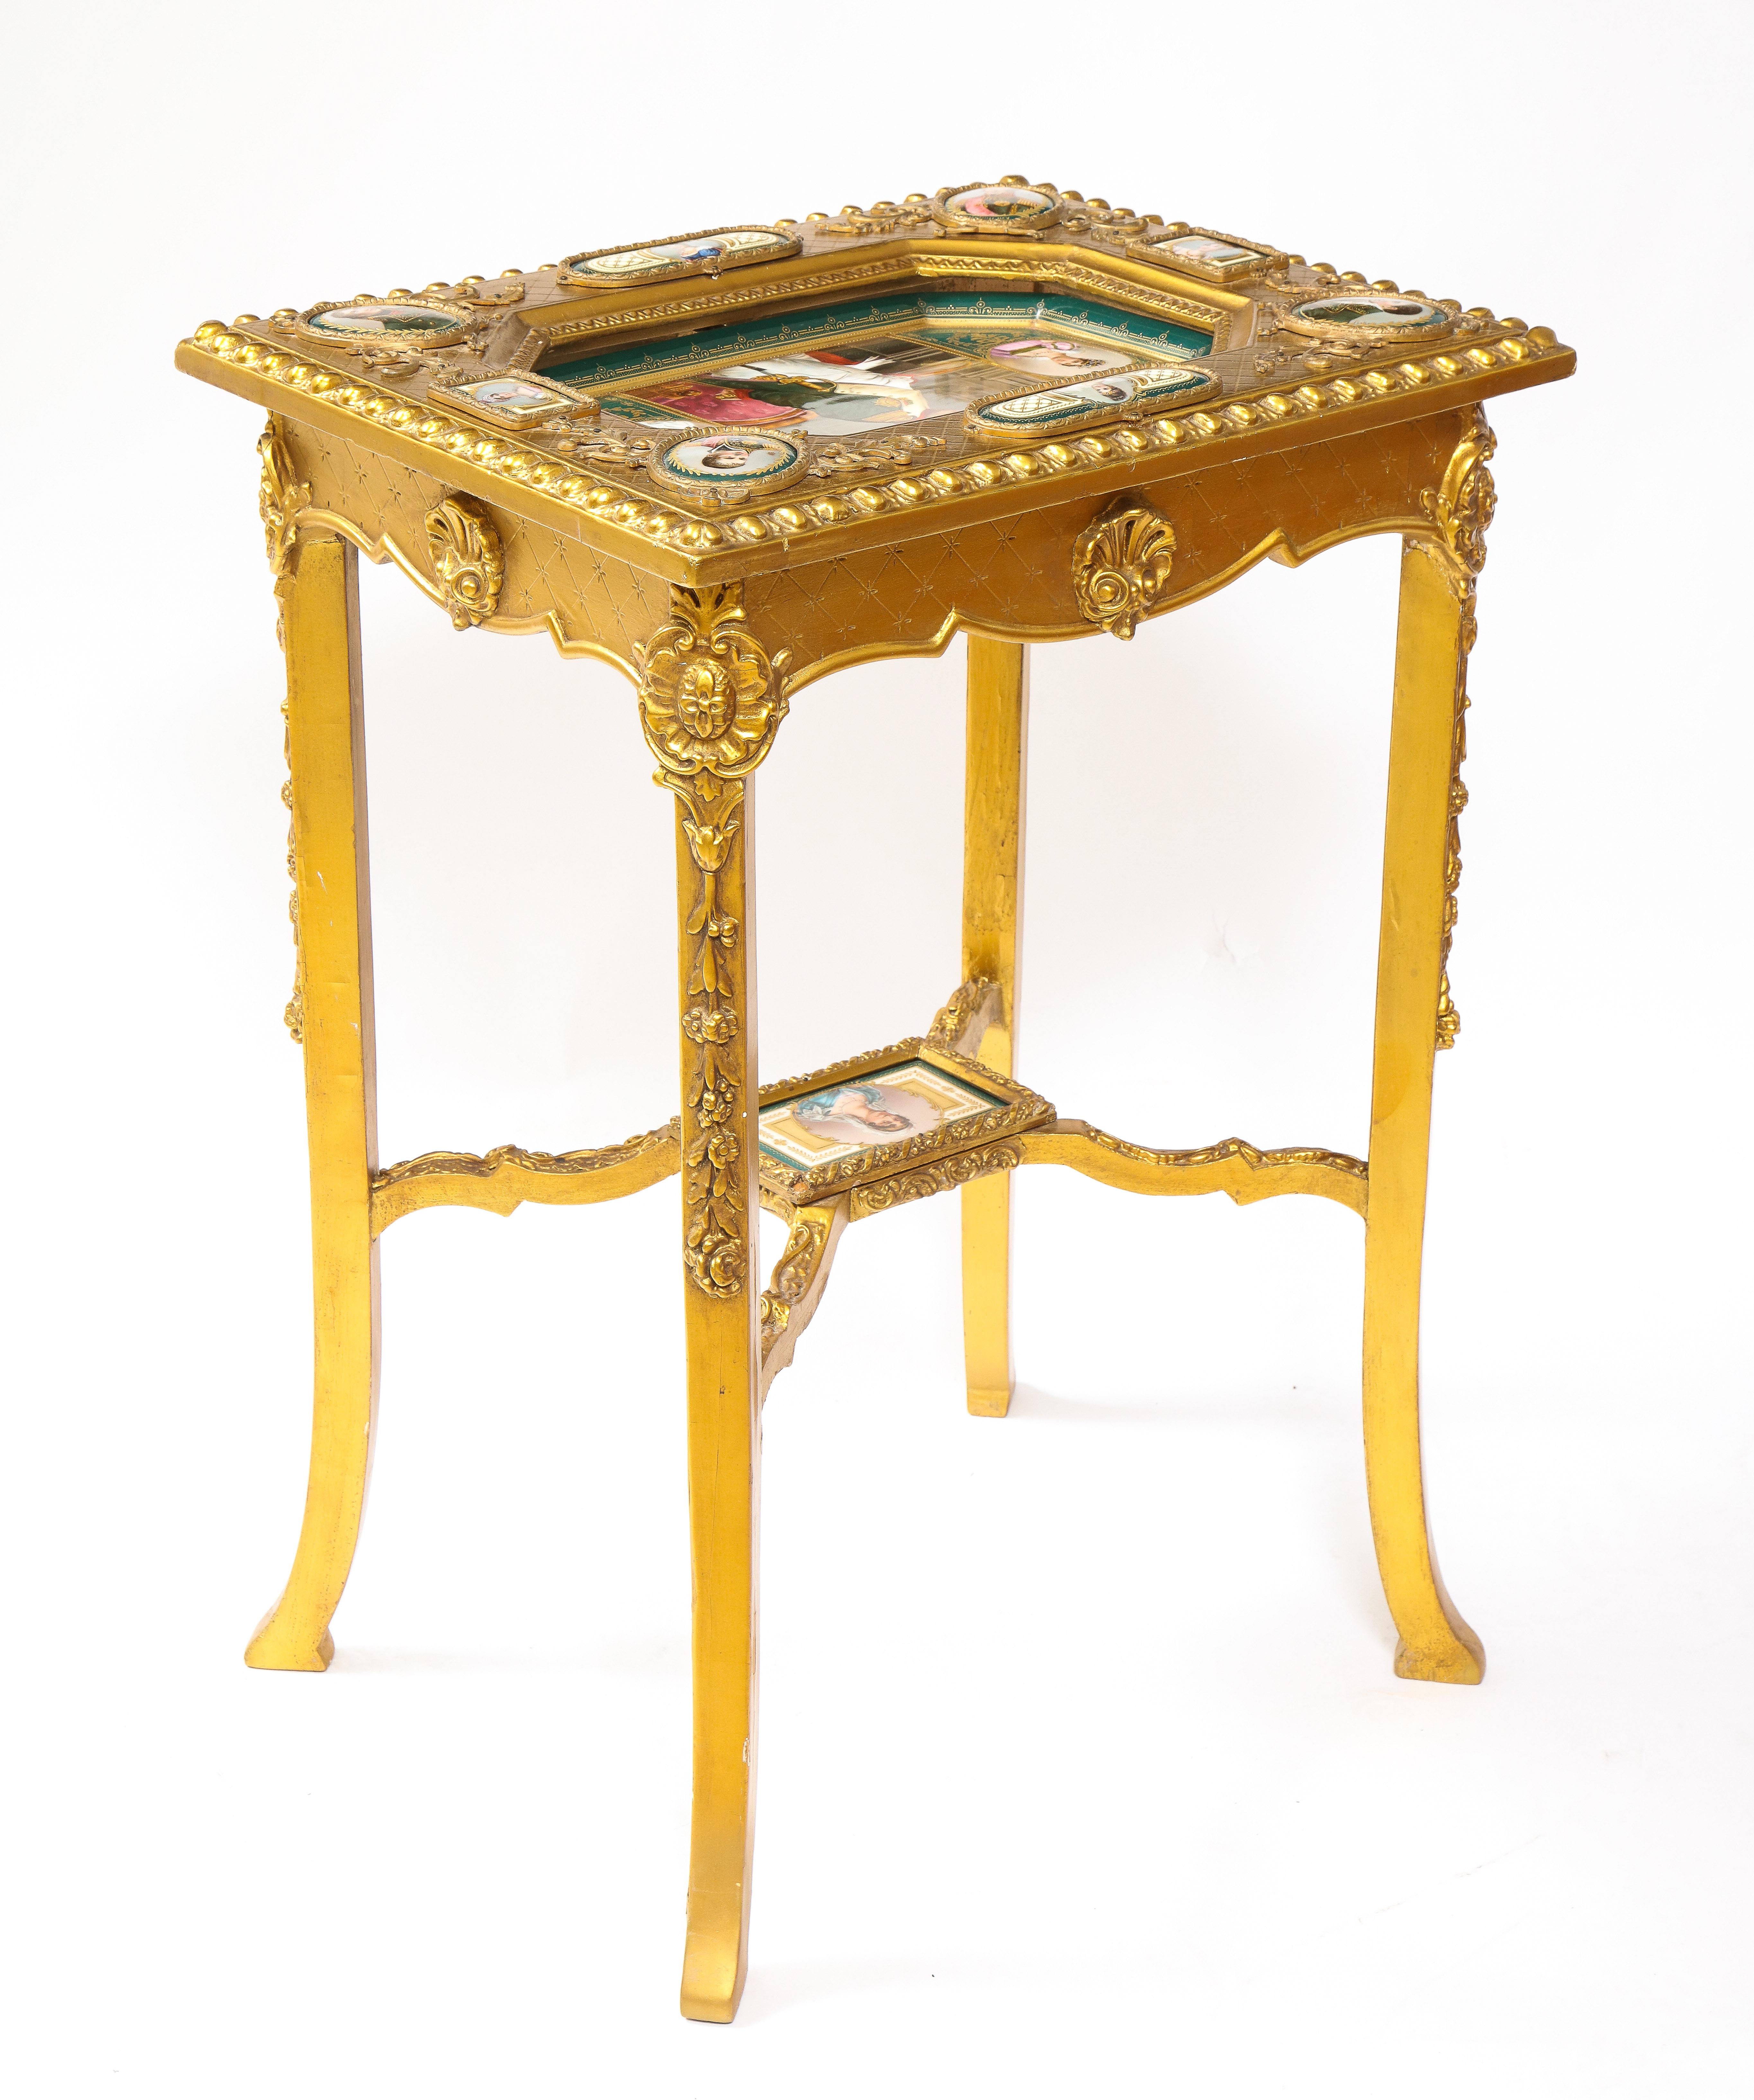 Empire 19th C. Napoleonic Royal Vienna Giltwood Side Table w/ Inlaid Porcelain Plaques For Sale